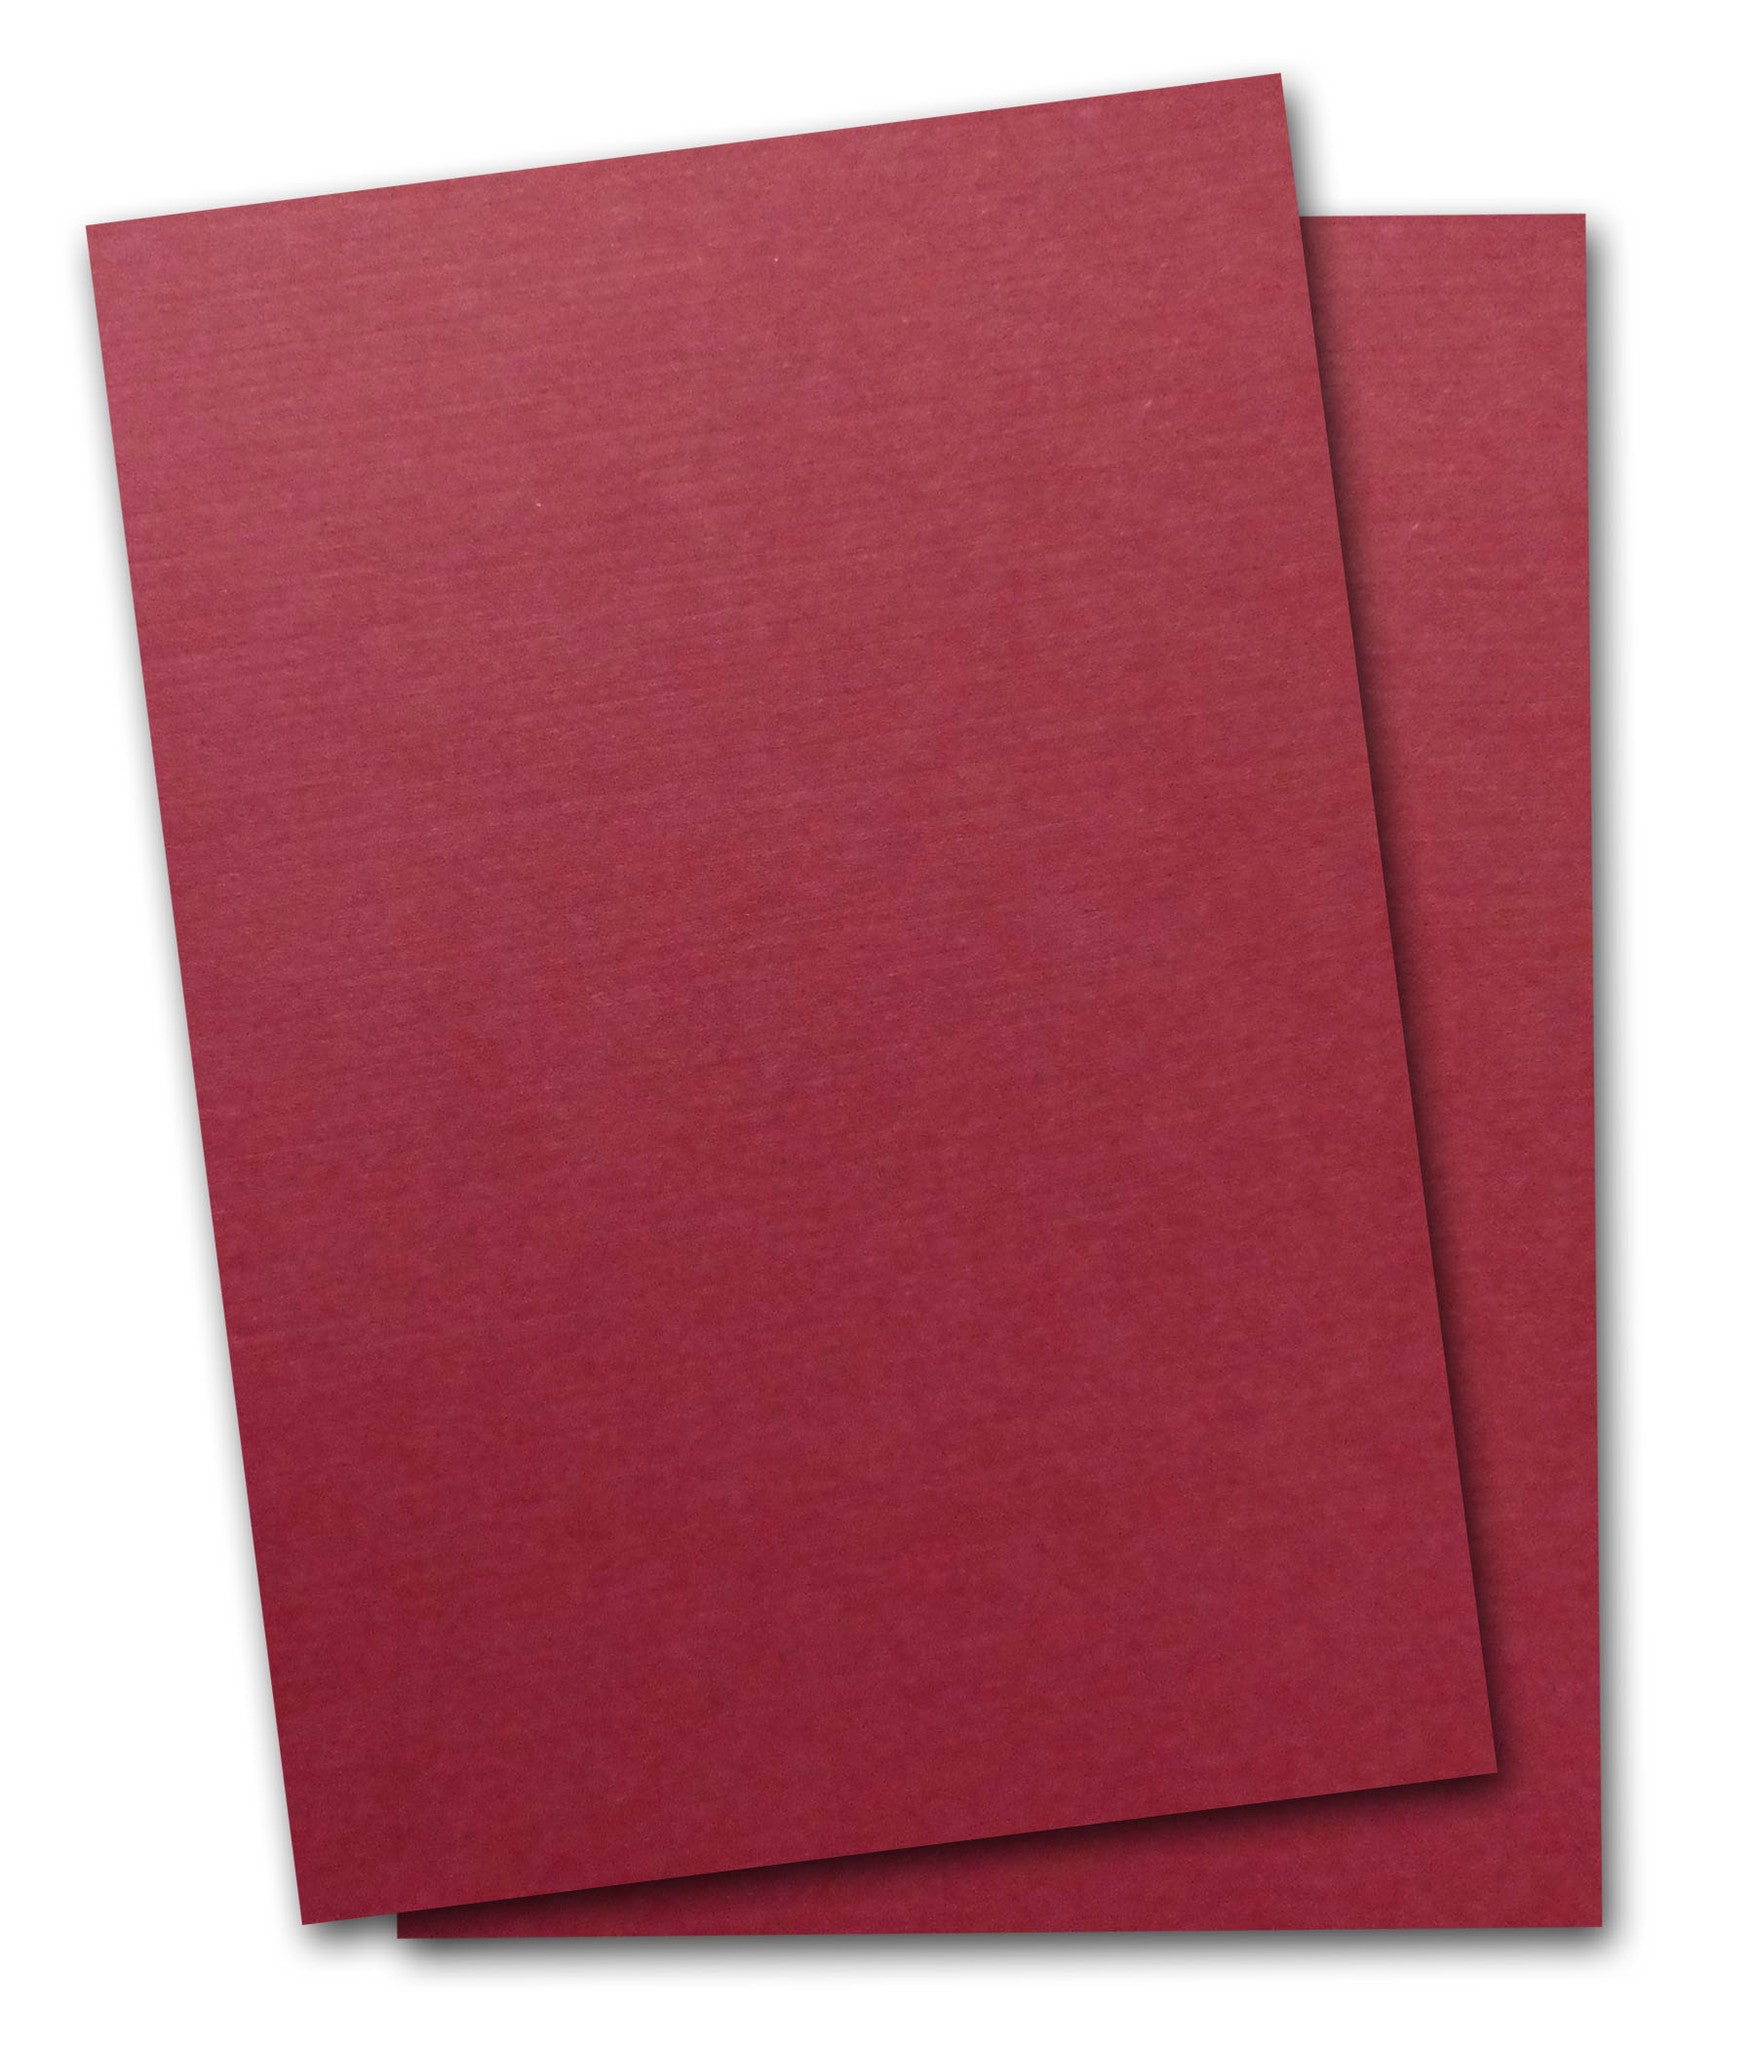 Burgundy Discount Card Stock Paper for DIY invitations and